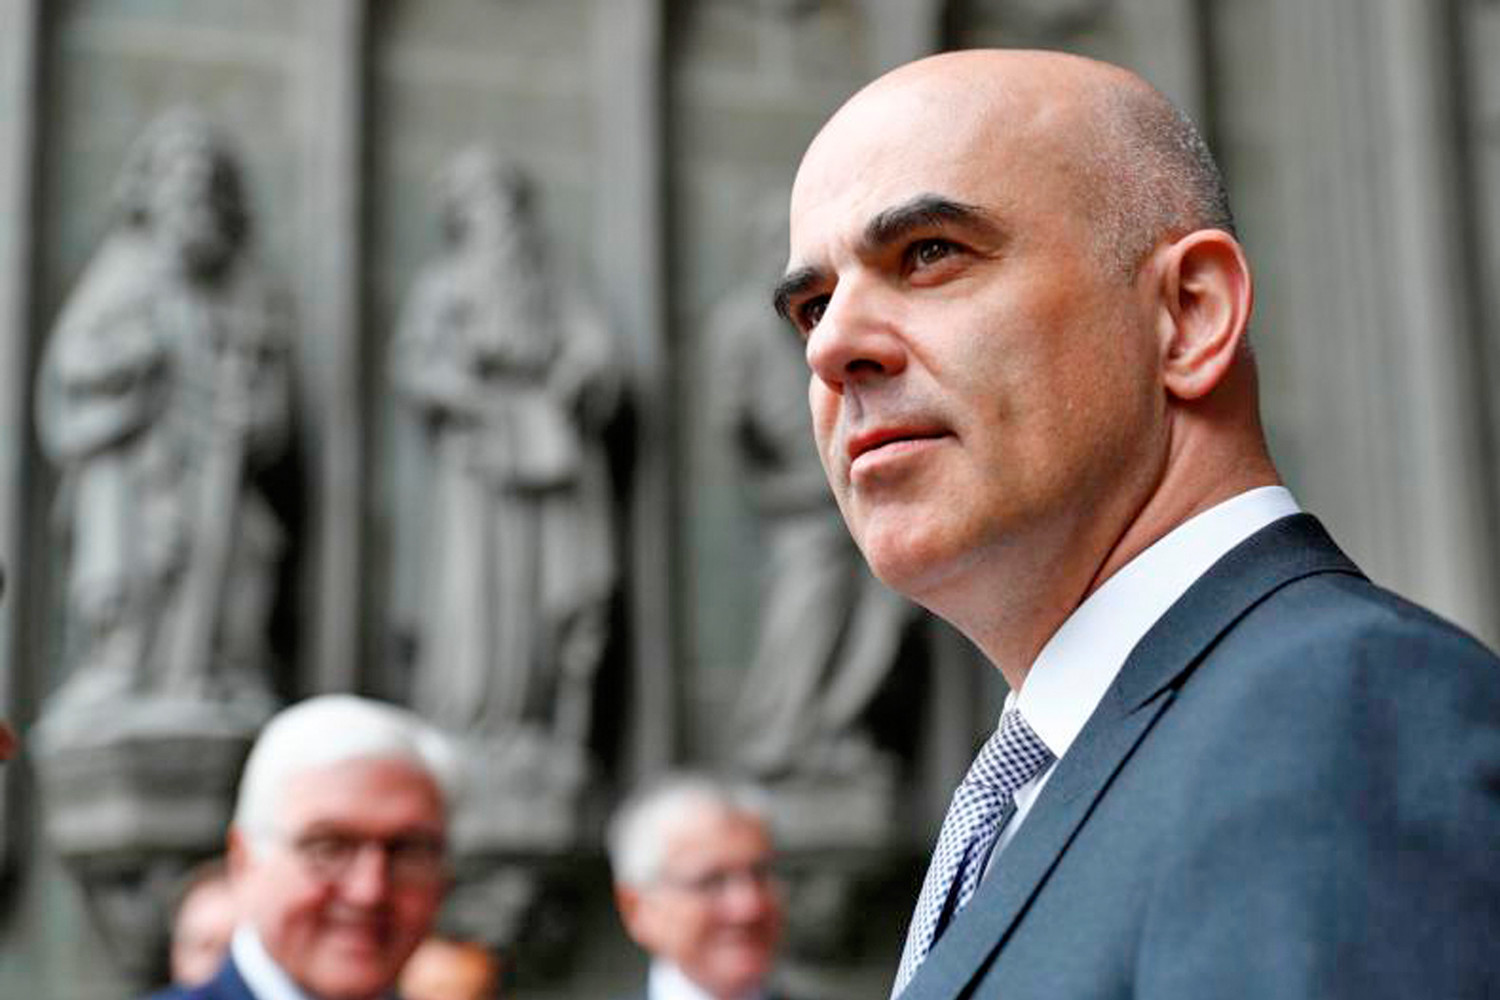 Swiss President Alain Berset is pictured in Switzerland April 26. Pope Francis will meet him prior to the start of the ecumenical encounter at the World Council of Churches June 21.